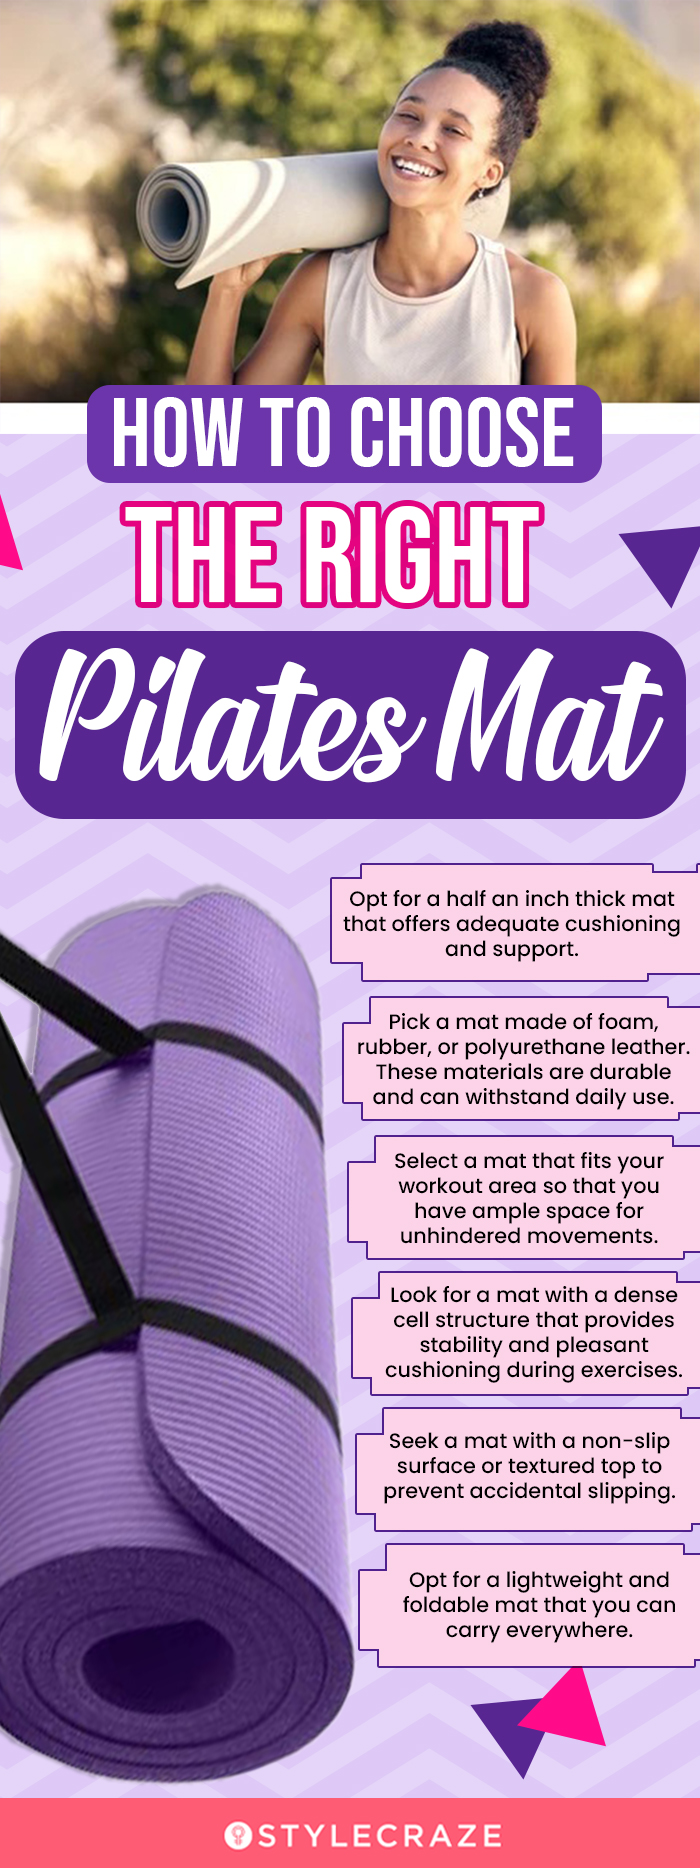 How To Choose The Right Pilates Mat (infographic)